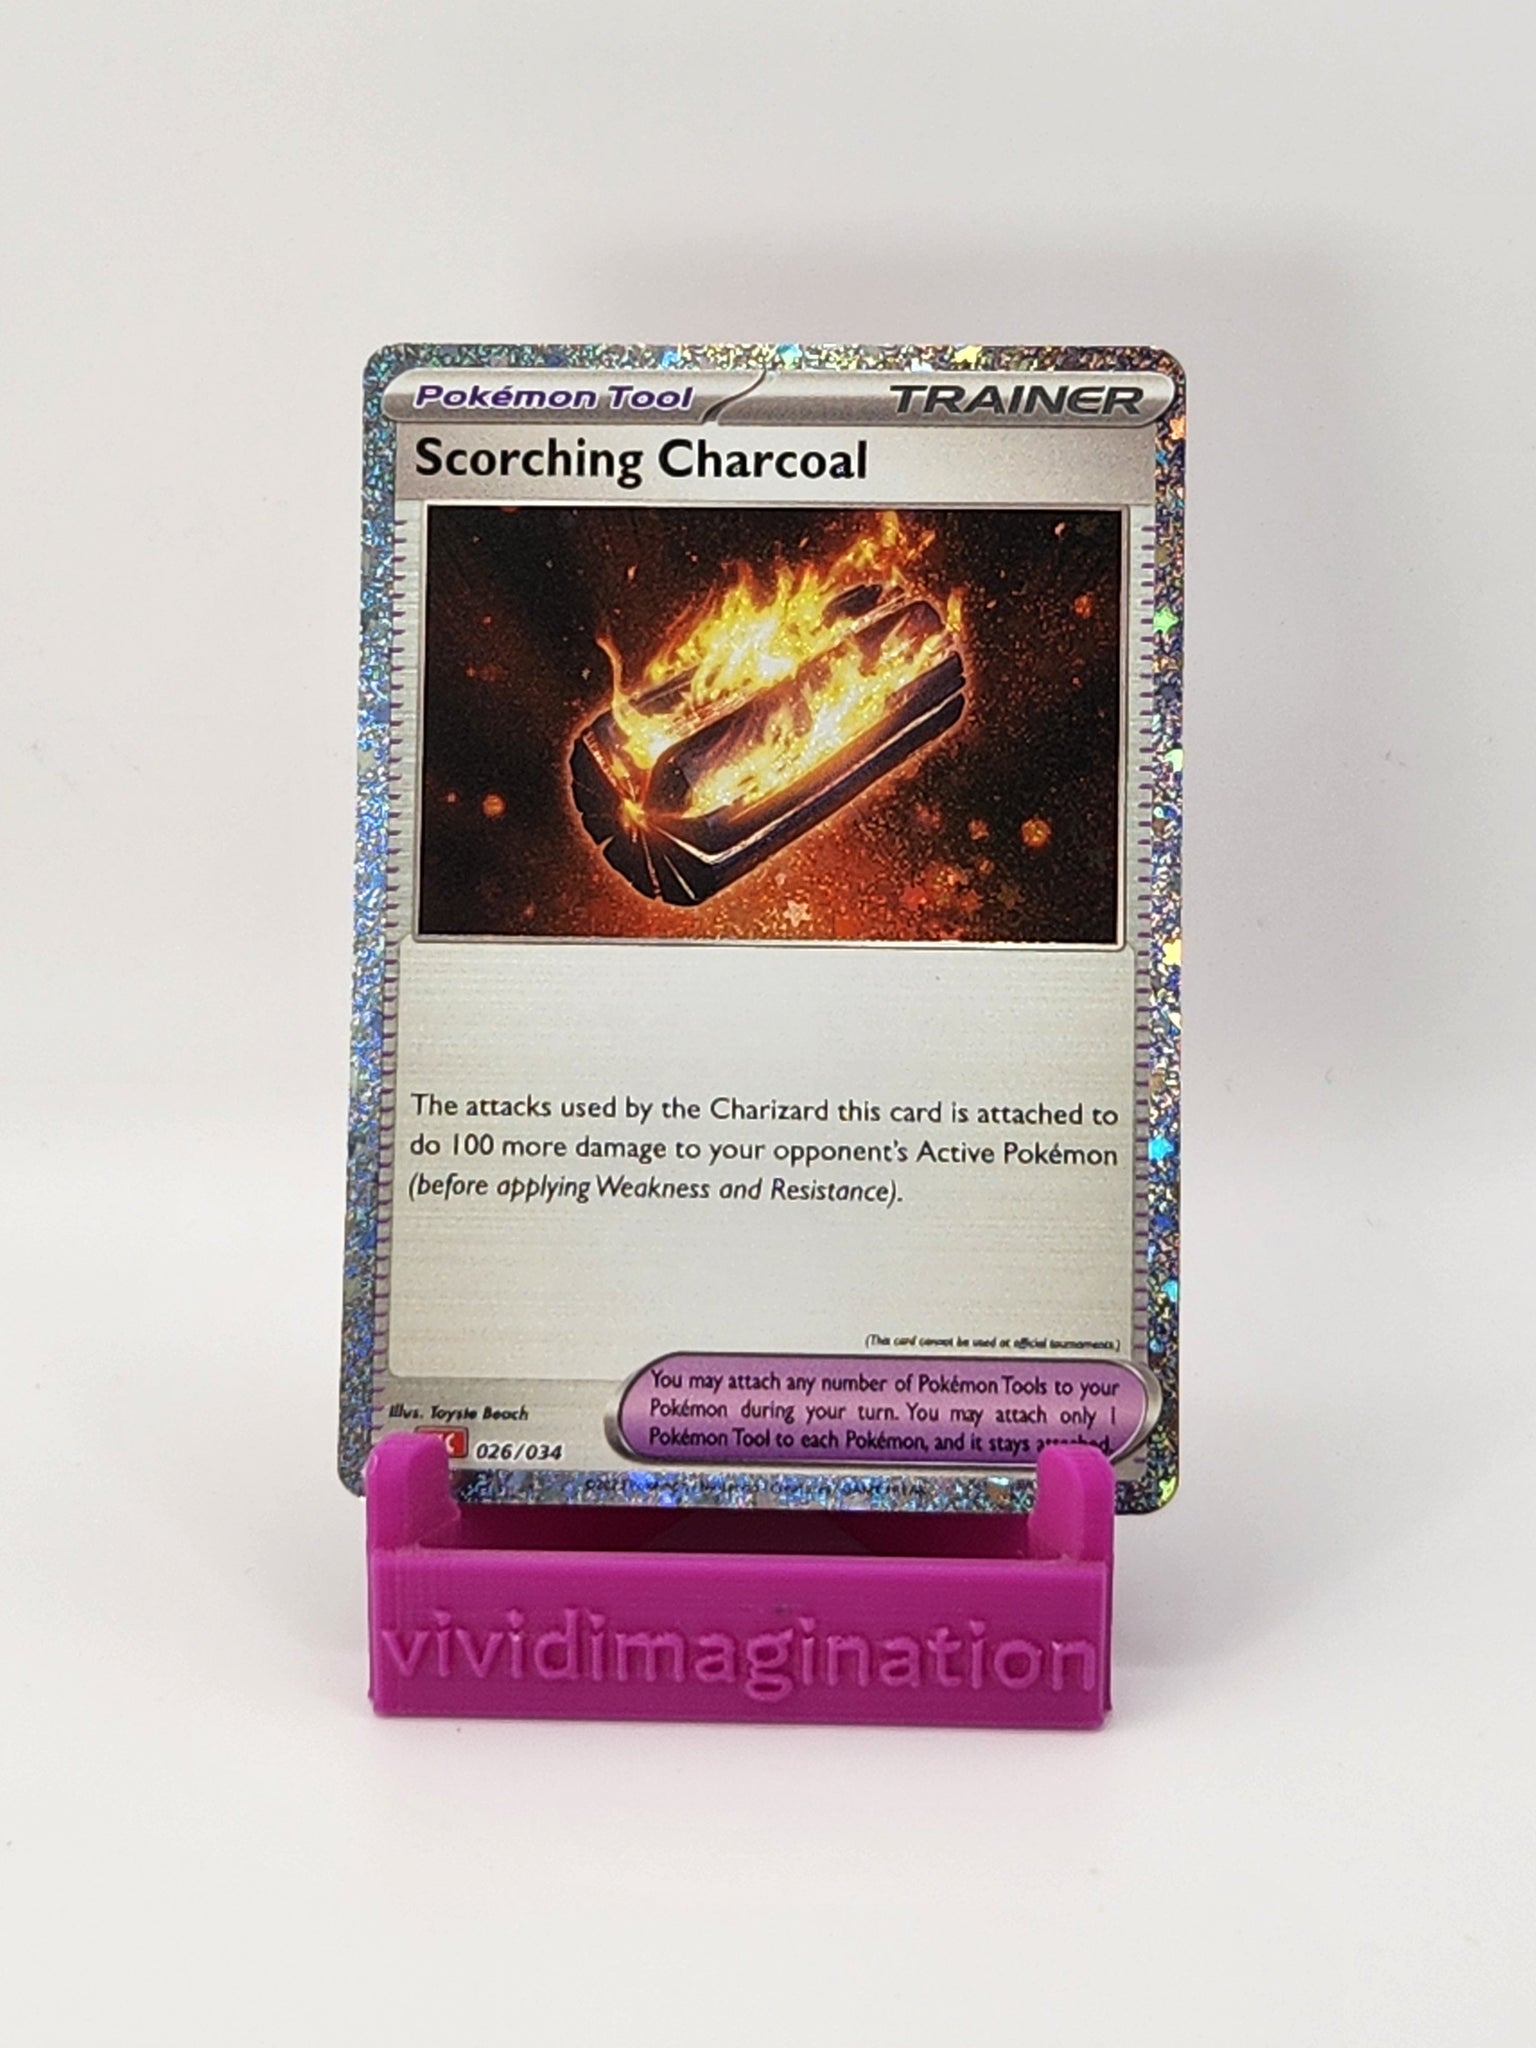 Scorching Charcoal 026/034 - All the best items from Vivid Imagination Cards and Collectibles - Just $3.99! Shop now at Vivid Imagination Cards and Collectibles